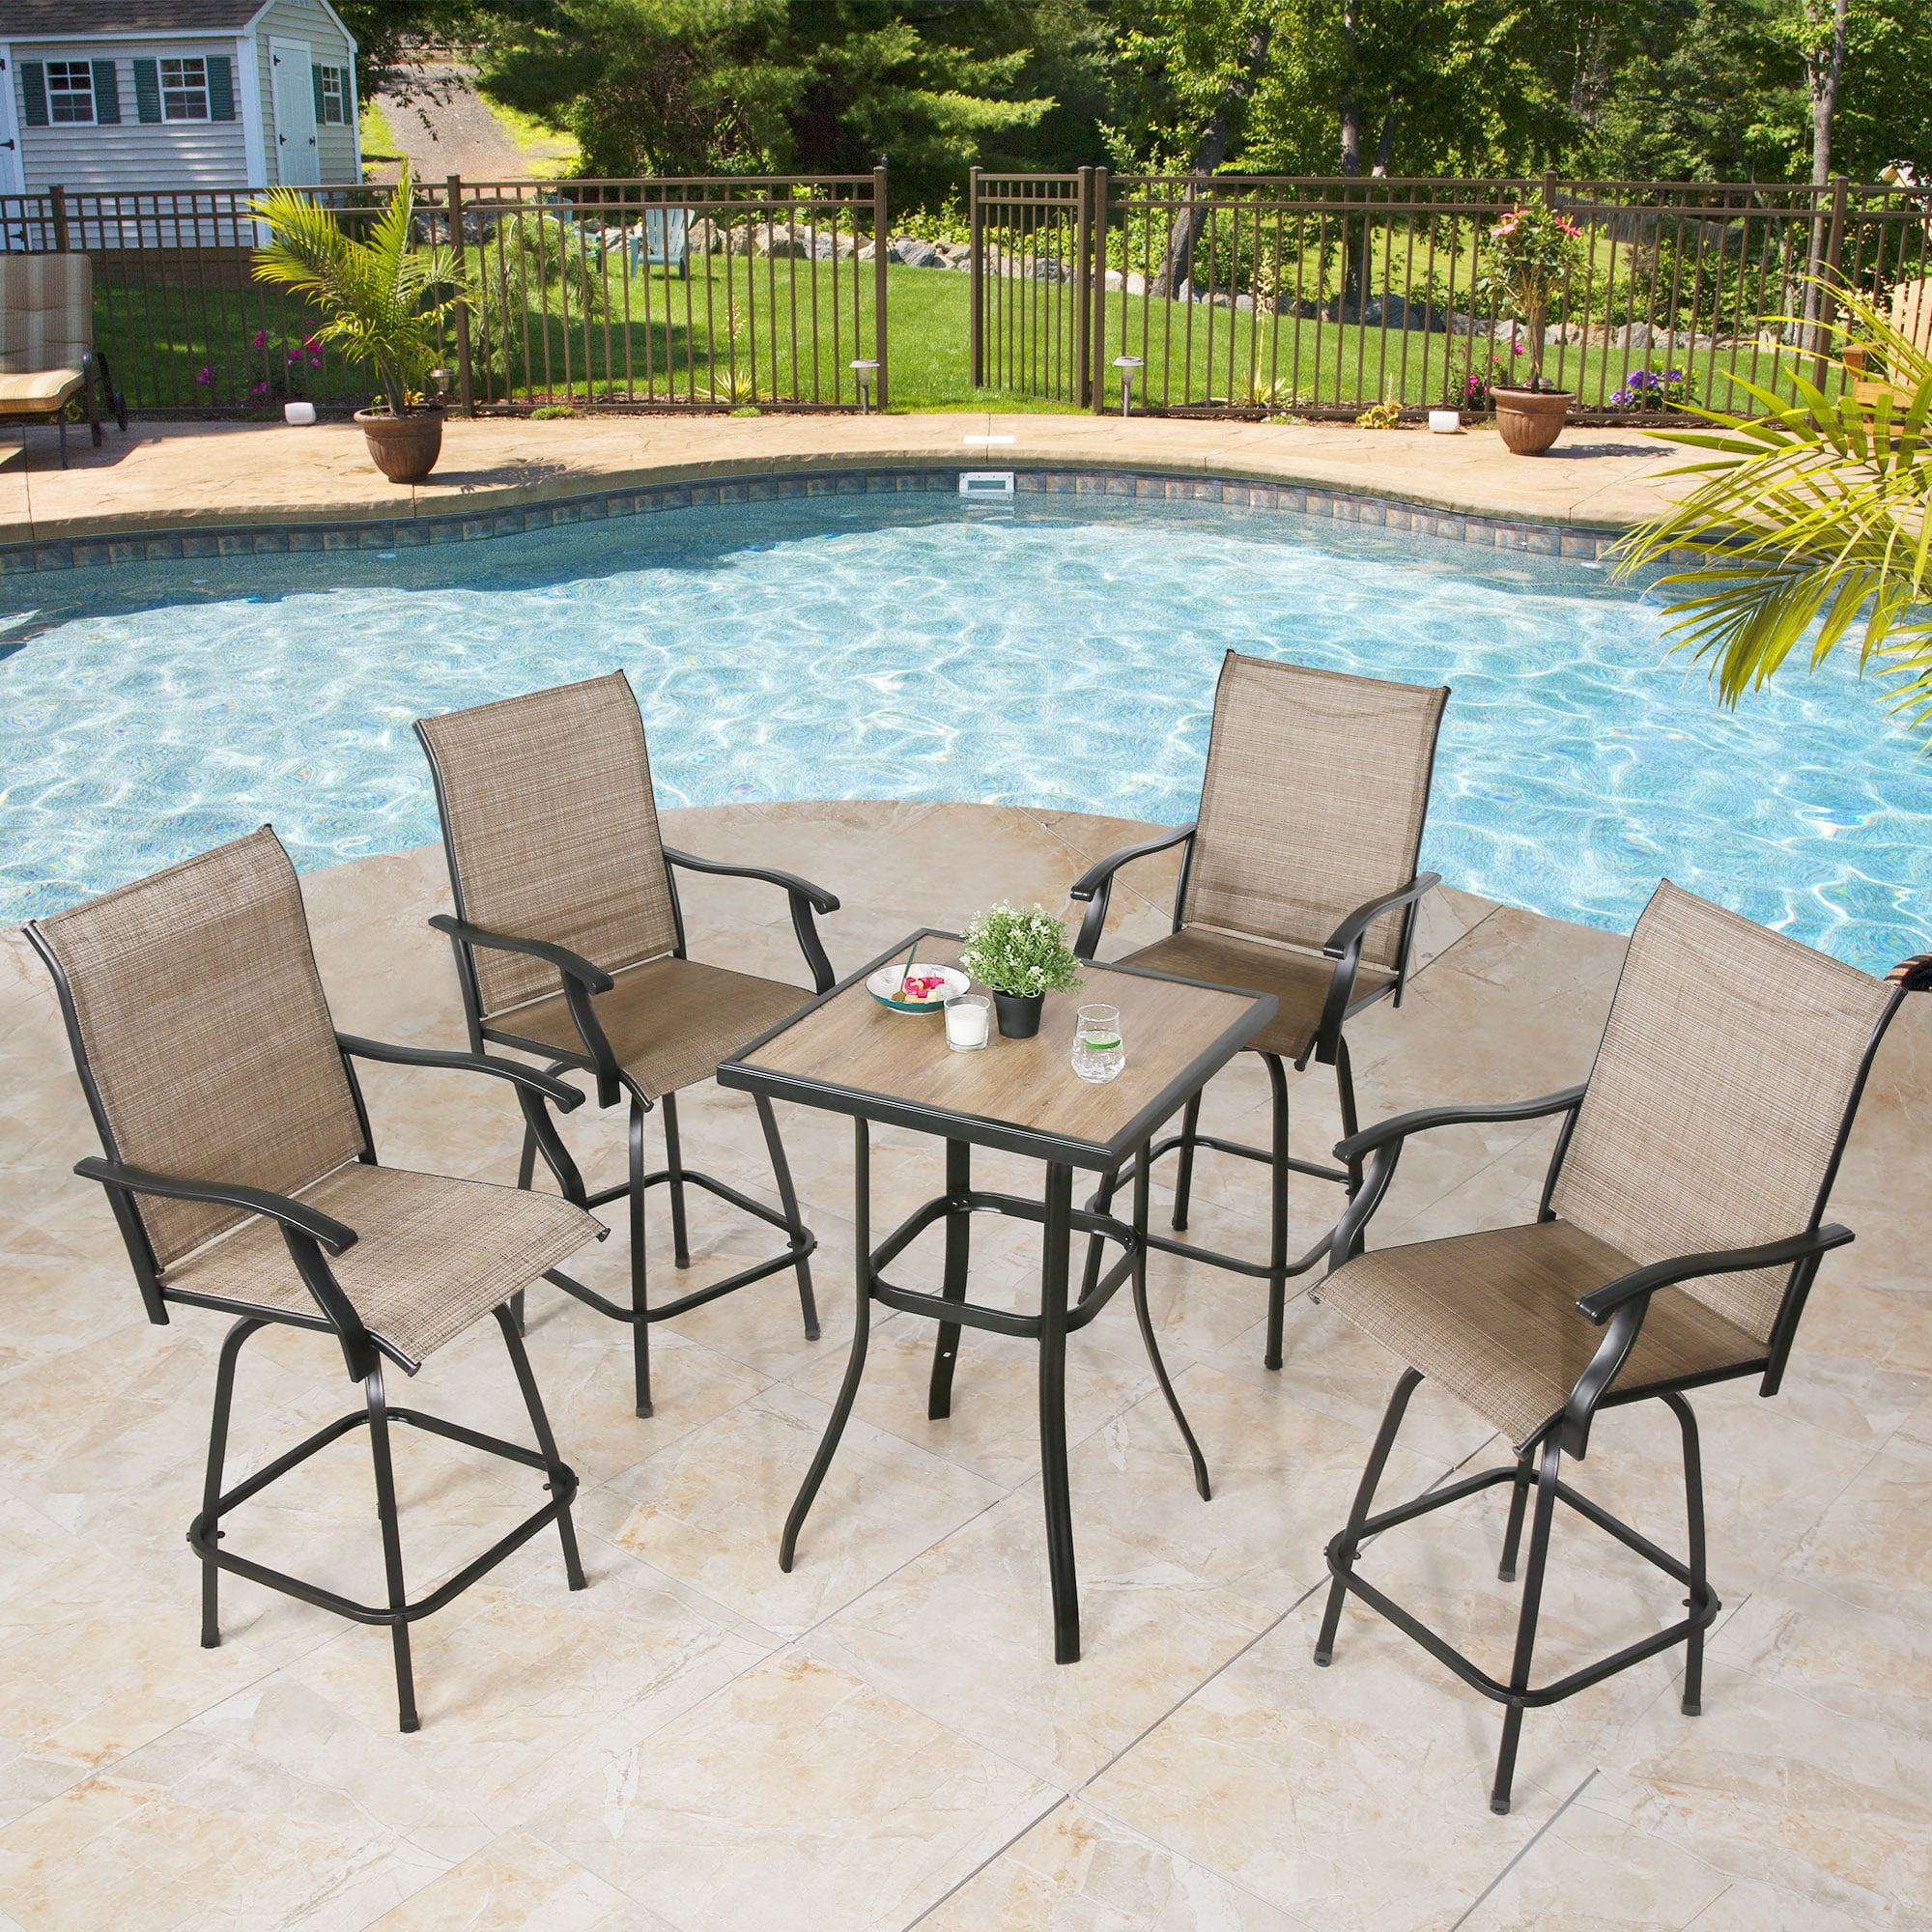 DOMI OUTDOOR LIVING Traditions Cast Aluminum 9-Piece Dining Set with Seat Cushions and 63-Inch Square Dining Table Antique Bronze Finish